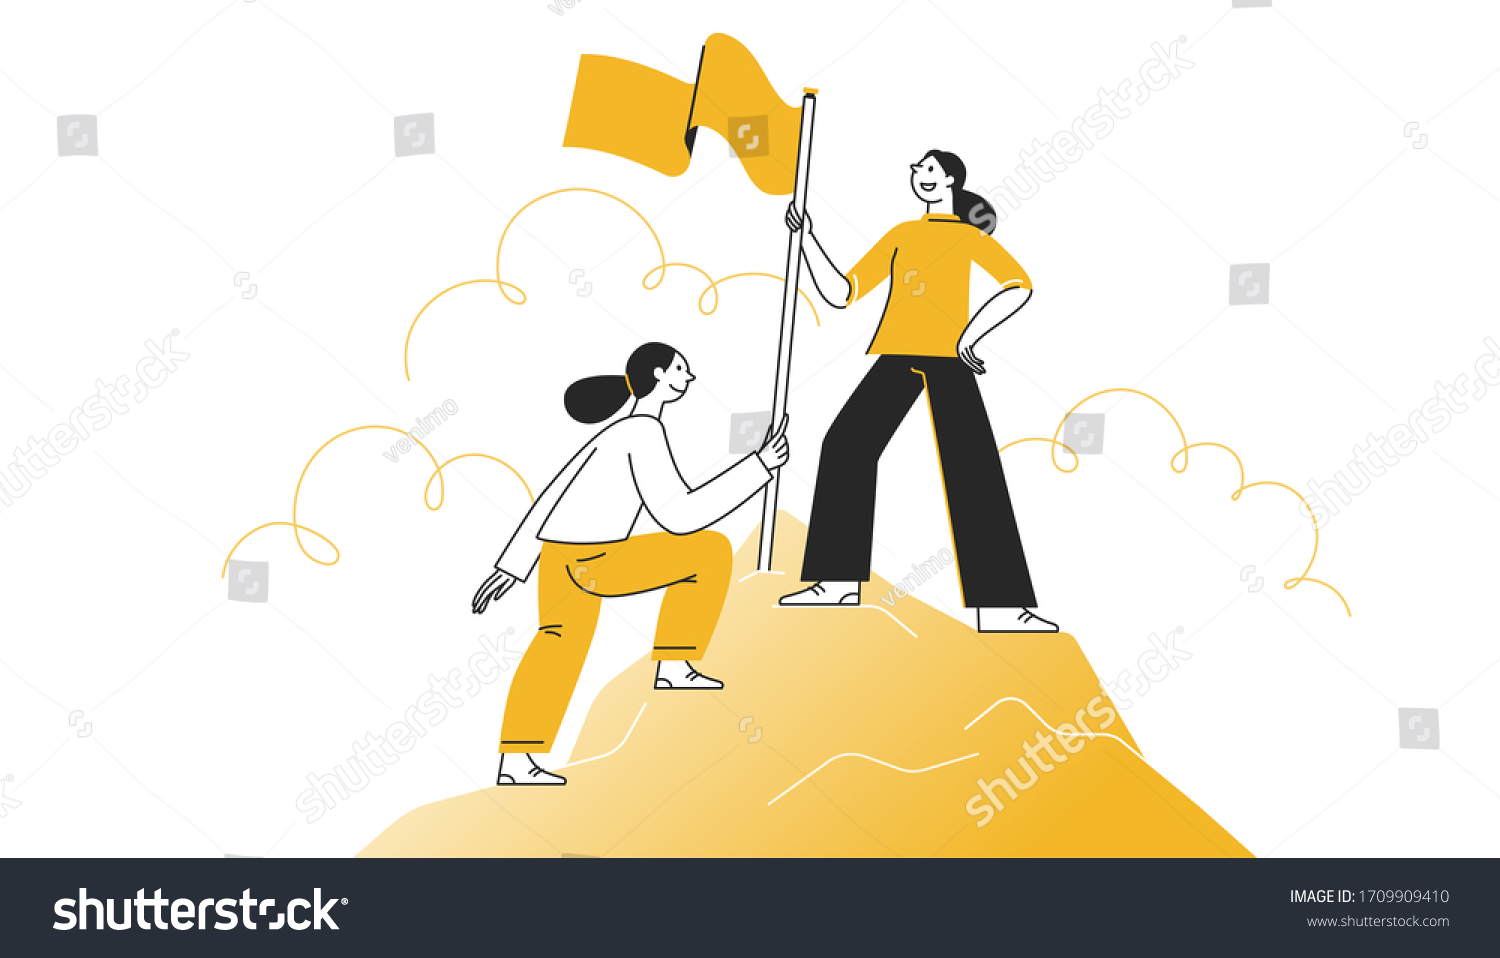 SVG of Vector illustration in flat cartoon simple style with characters - women climbing to the top of the mountain with a flag - business competition and challenge concept  svg